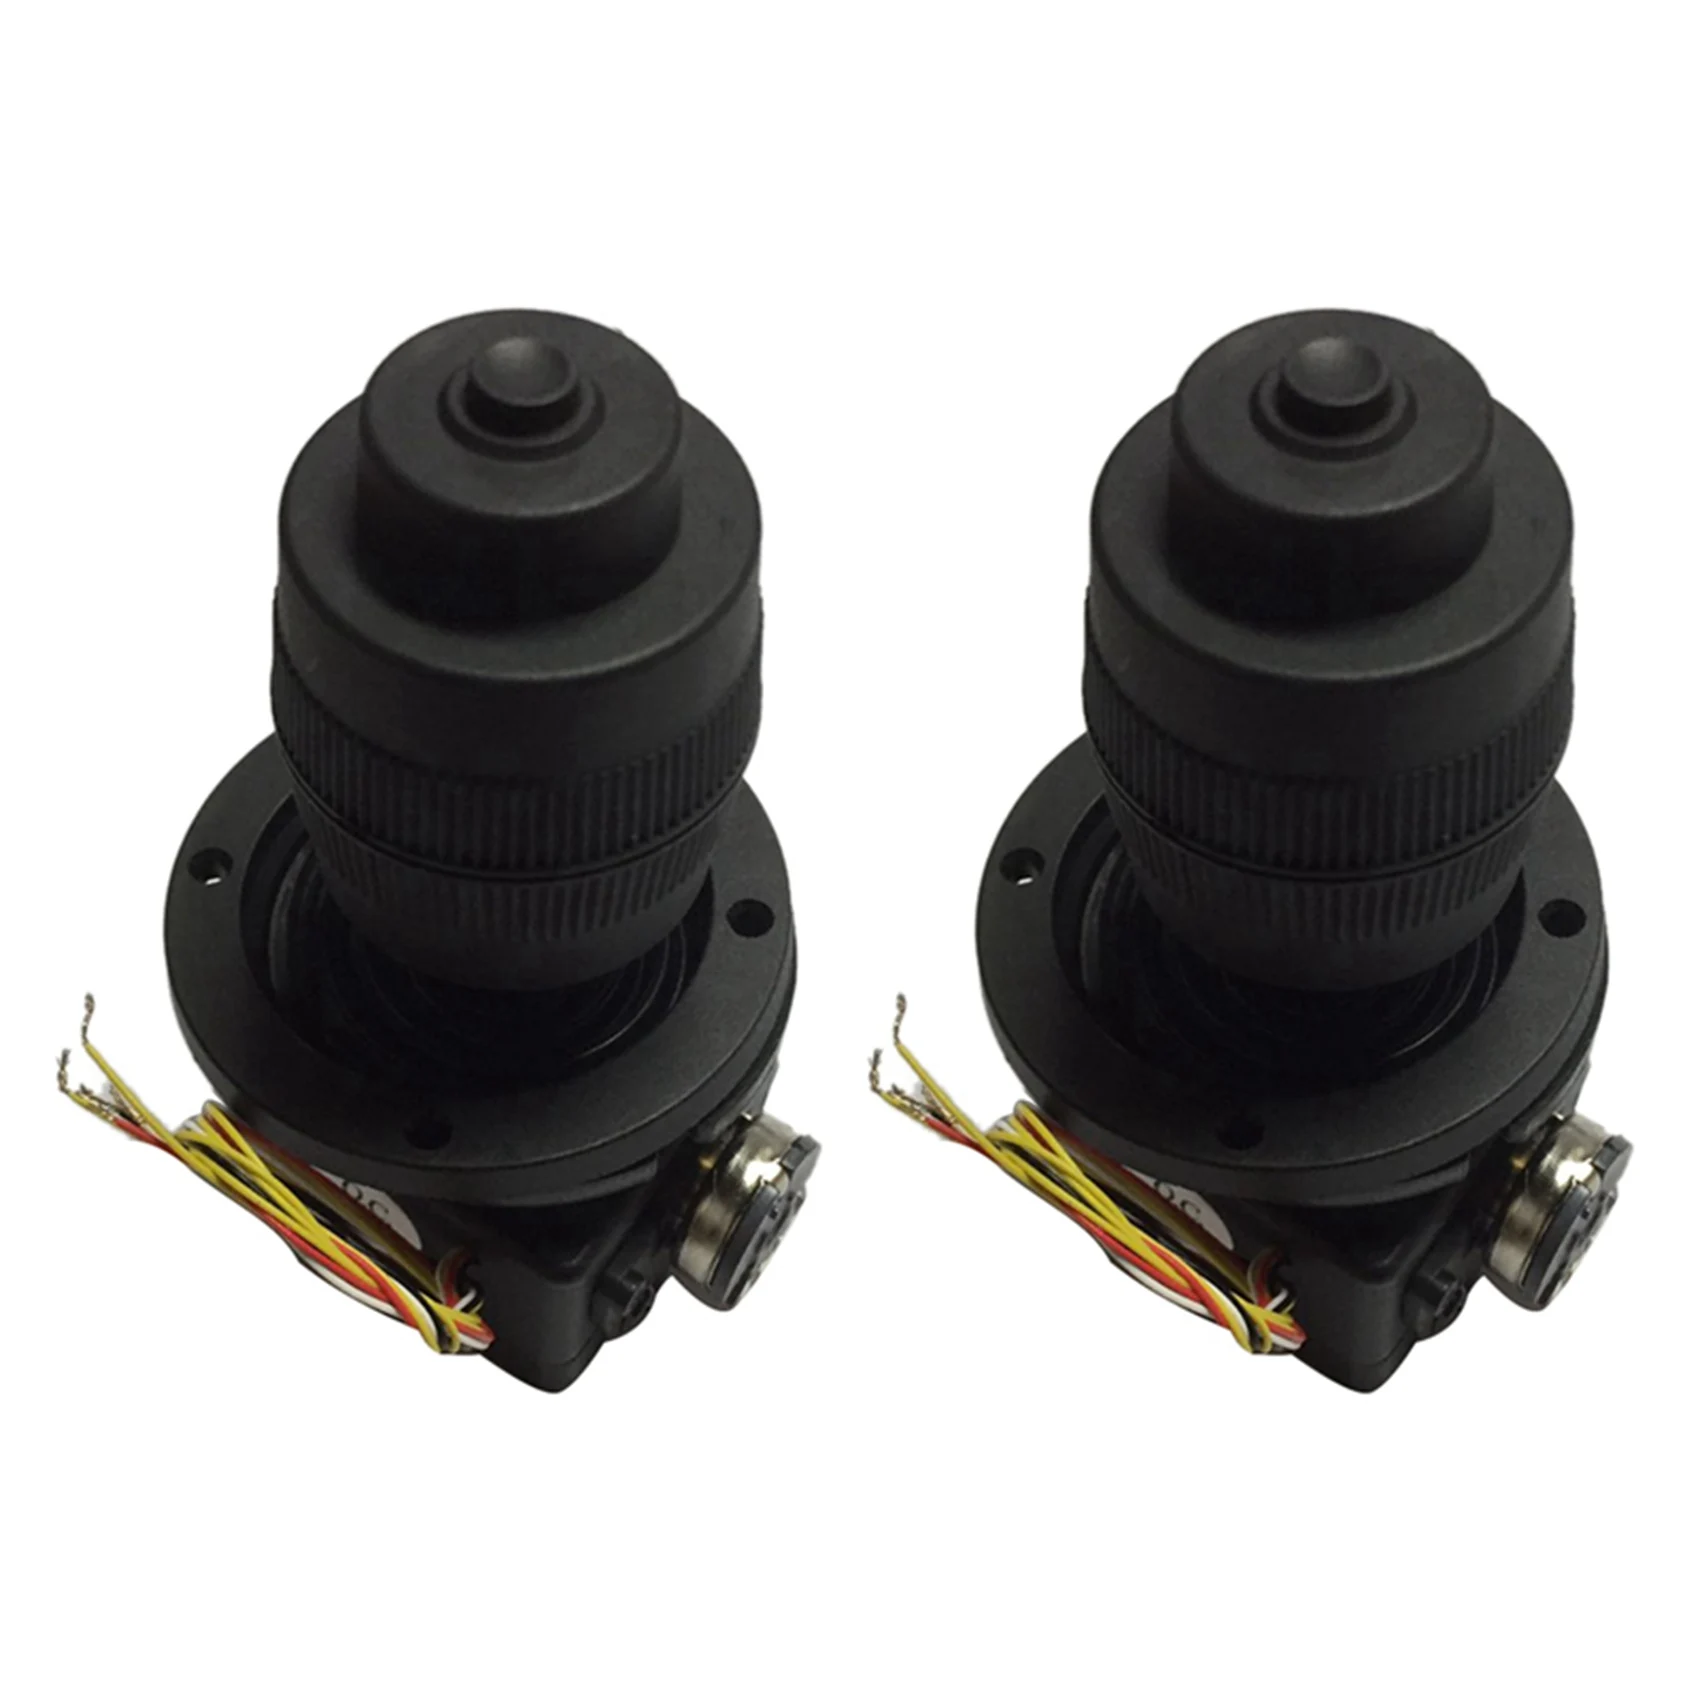 

2X New 4-Axis Joystick Potentiometer Jh-D400X-R2 5K Ohm 4D with Button Joystick with Track Number 12001297 R2 5K